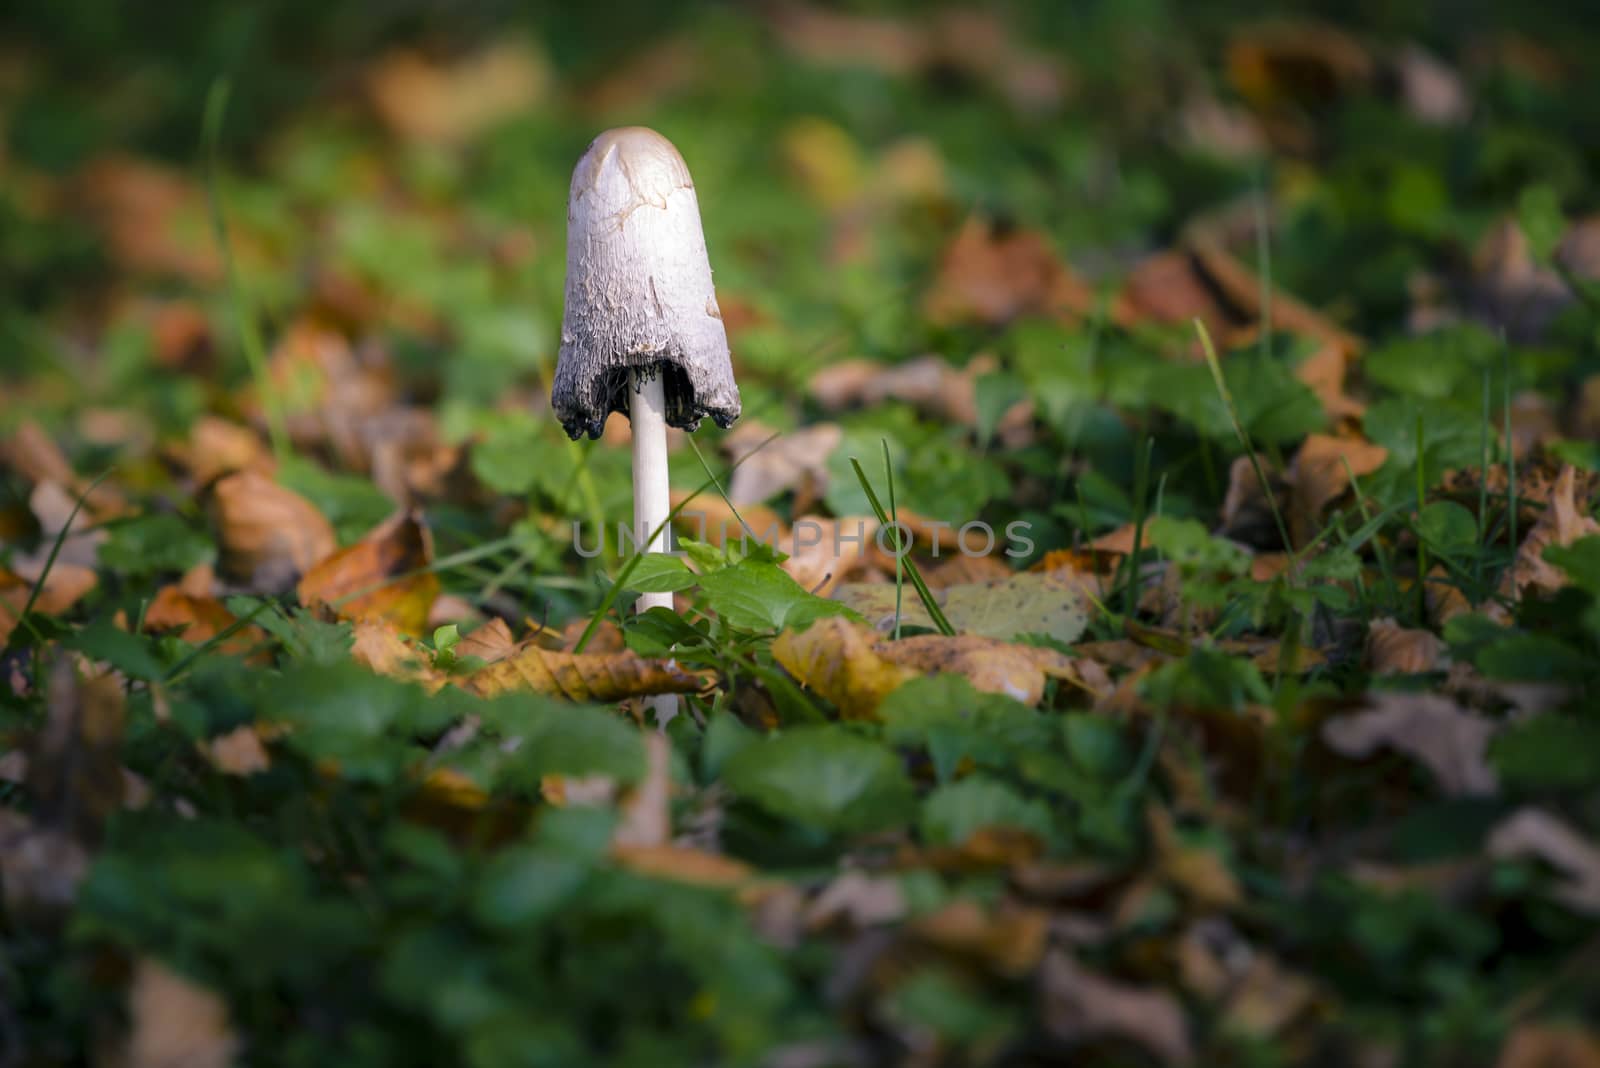 Mushroom in woods in autumn foliage on forest ground